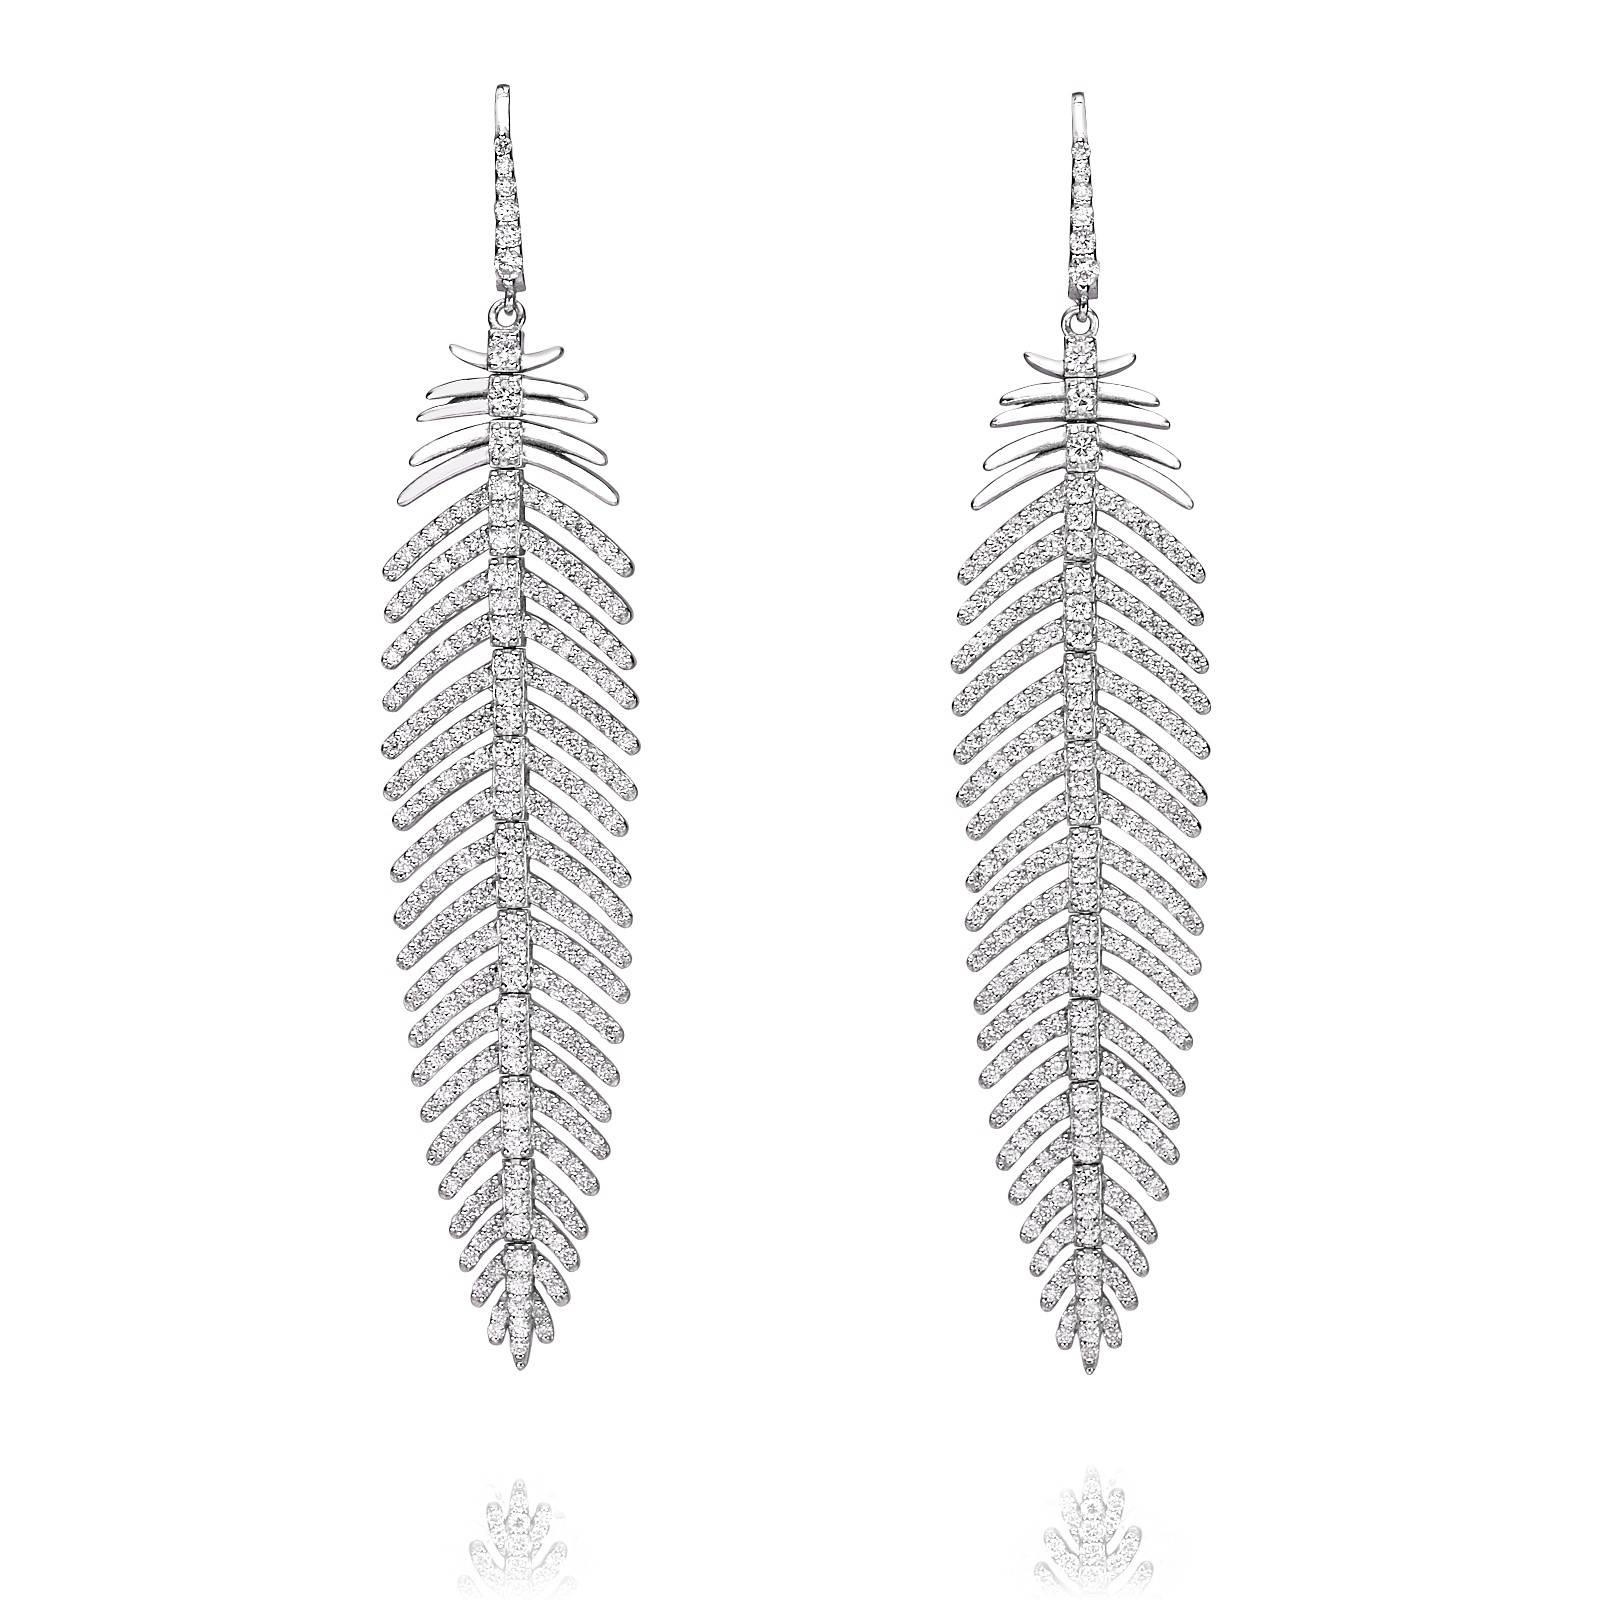 Classic Diamond Feather Earrings and Pendent set 5.55 Carat Total Diamond Weight. 
Our handcrafted limited edition earrings and pendent will compliment everybody's wardrobe, they can complete a red carpet look and upgrade a casual look. 
The